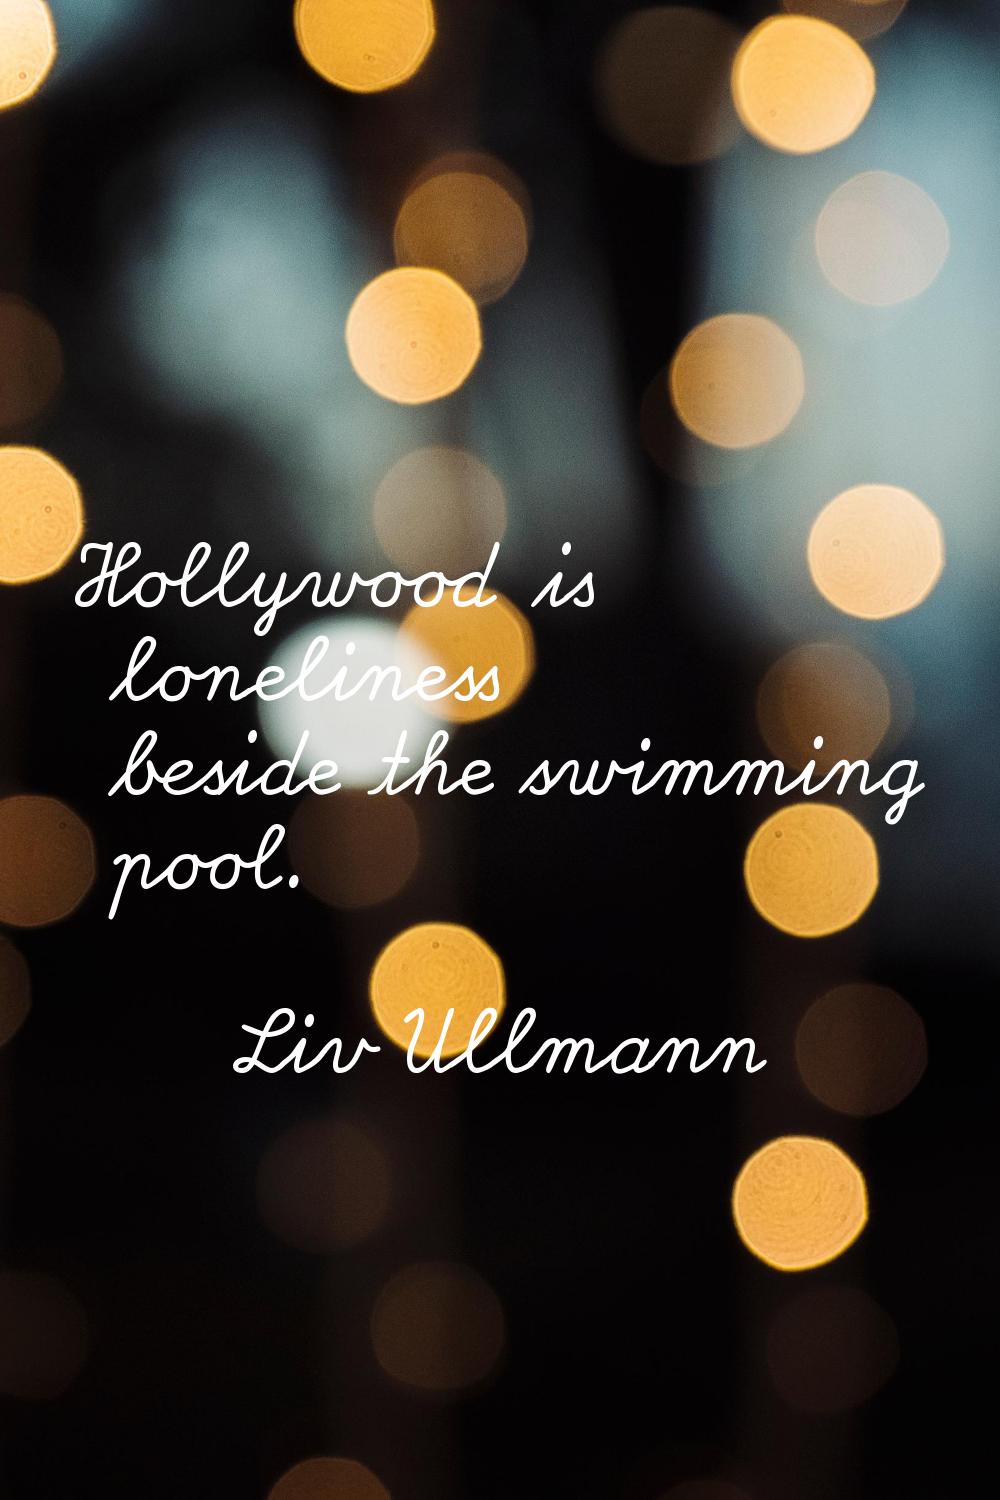 Hollywood is loneliness beside the swimming pool.